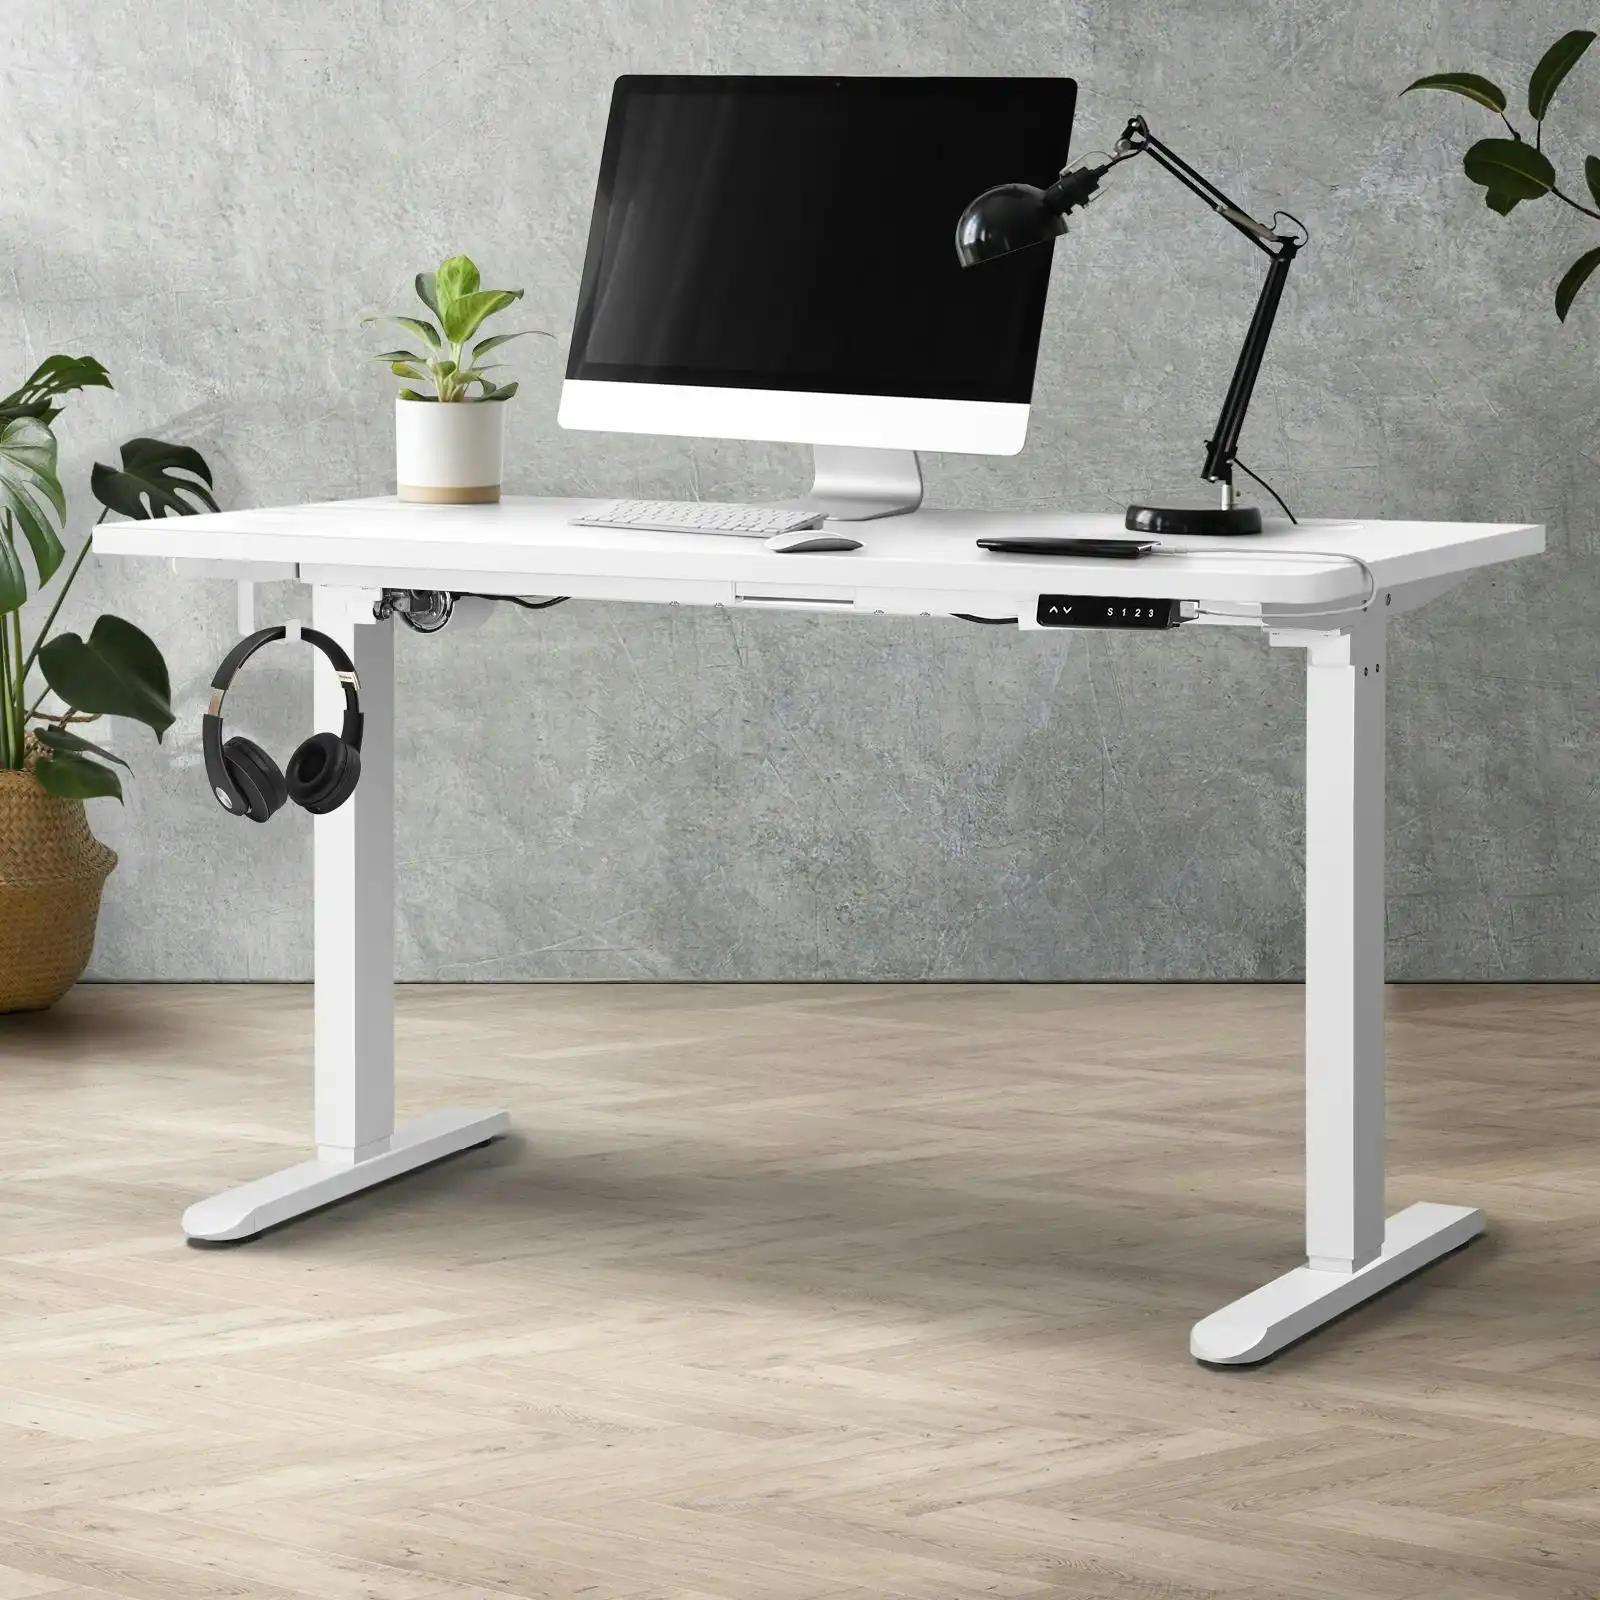 Oikiture 140cm Electric Standing Desk Single Motor White With USB&Type C Port